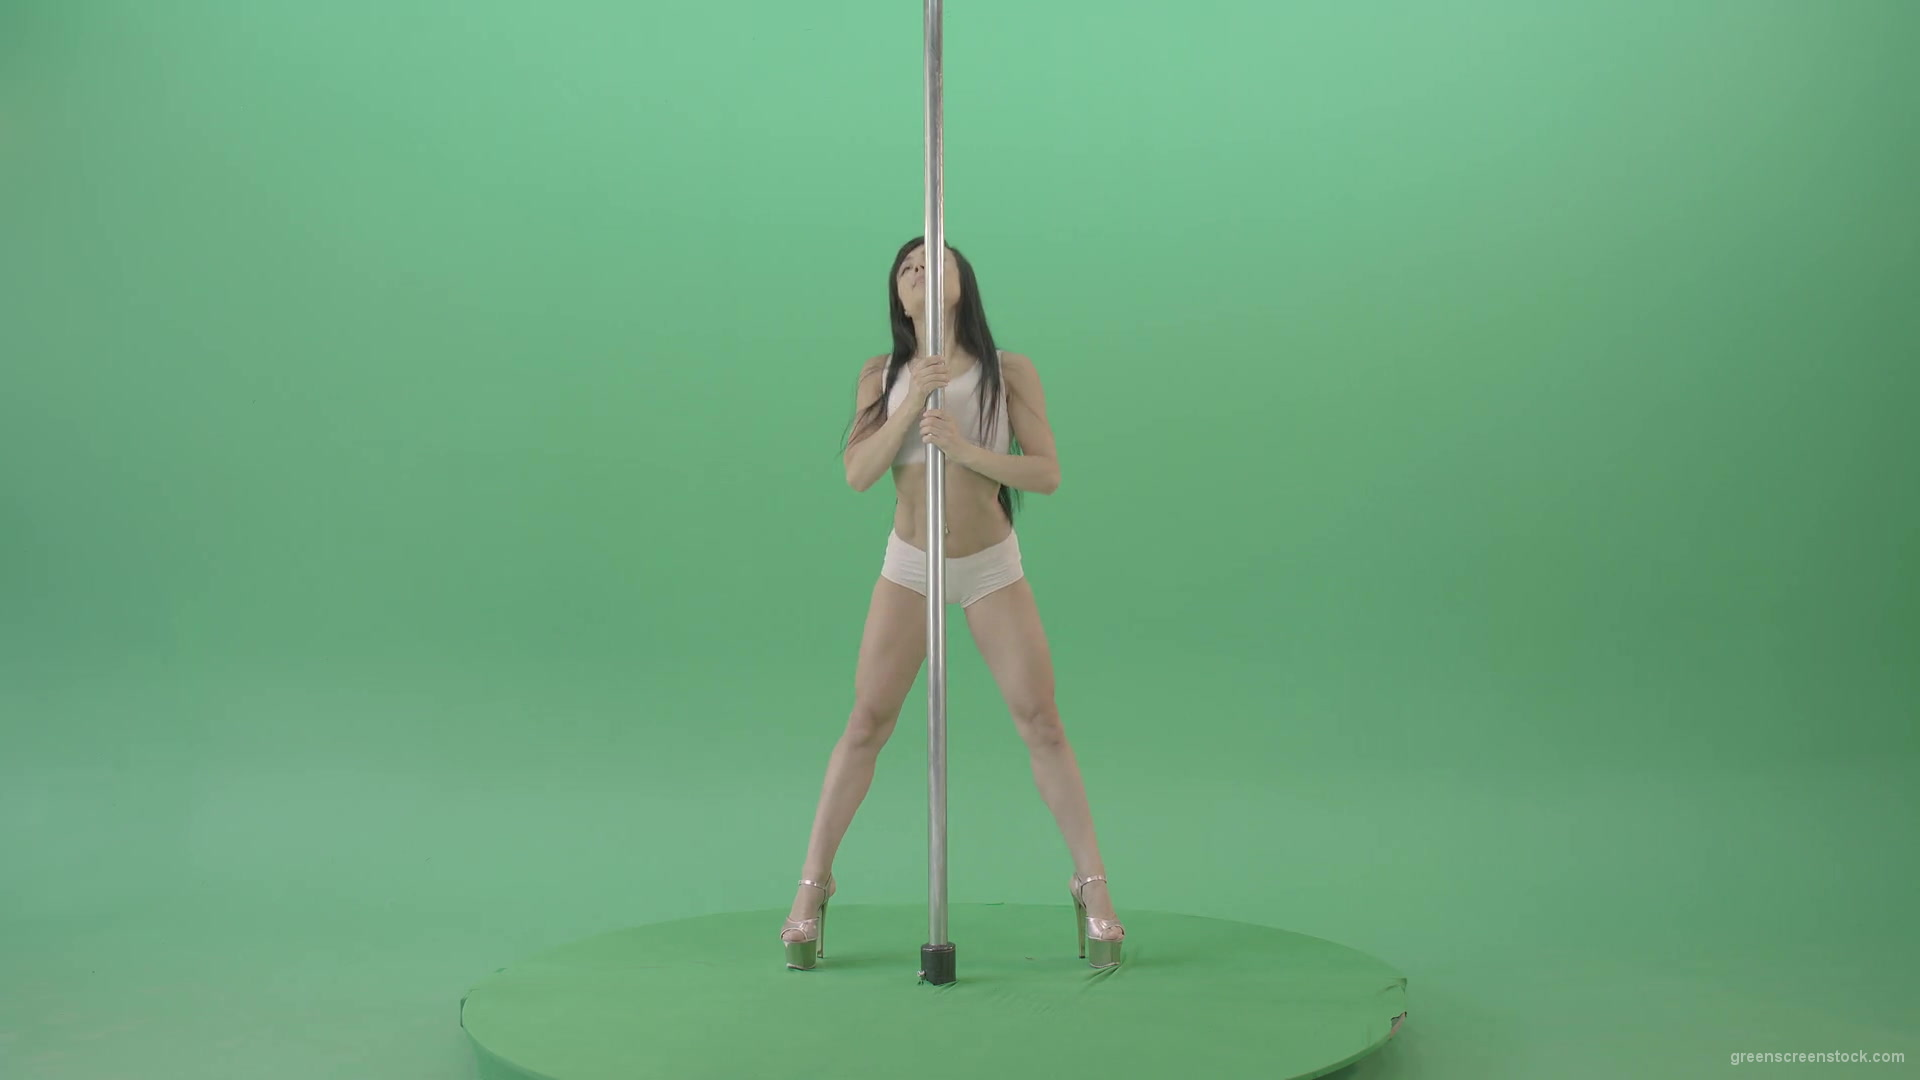 Pole-Dance-sport-girl-waving-sexy-body-isolated-on-green-screen-4K-Video-Footage-1920_004 Green Screen Stock